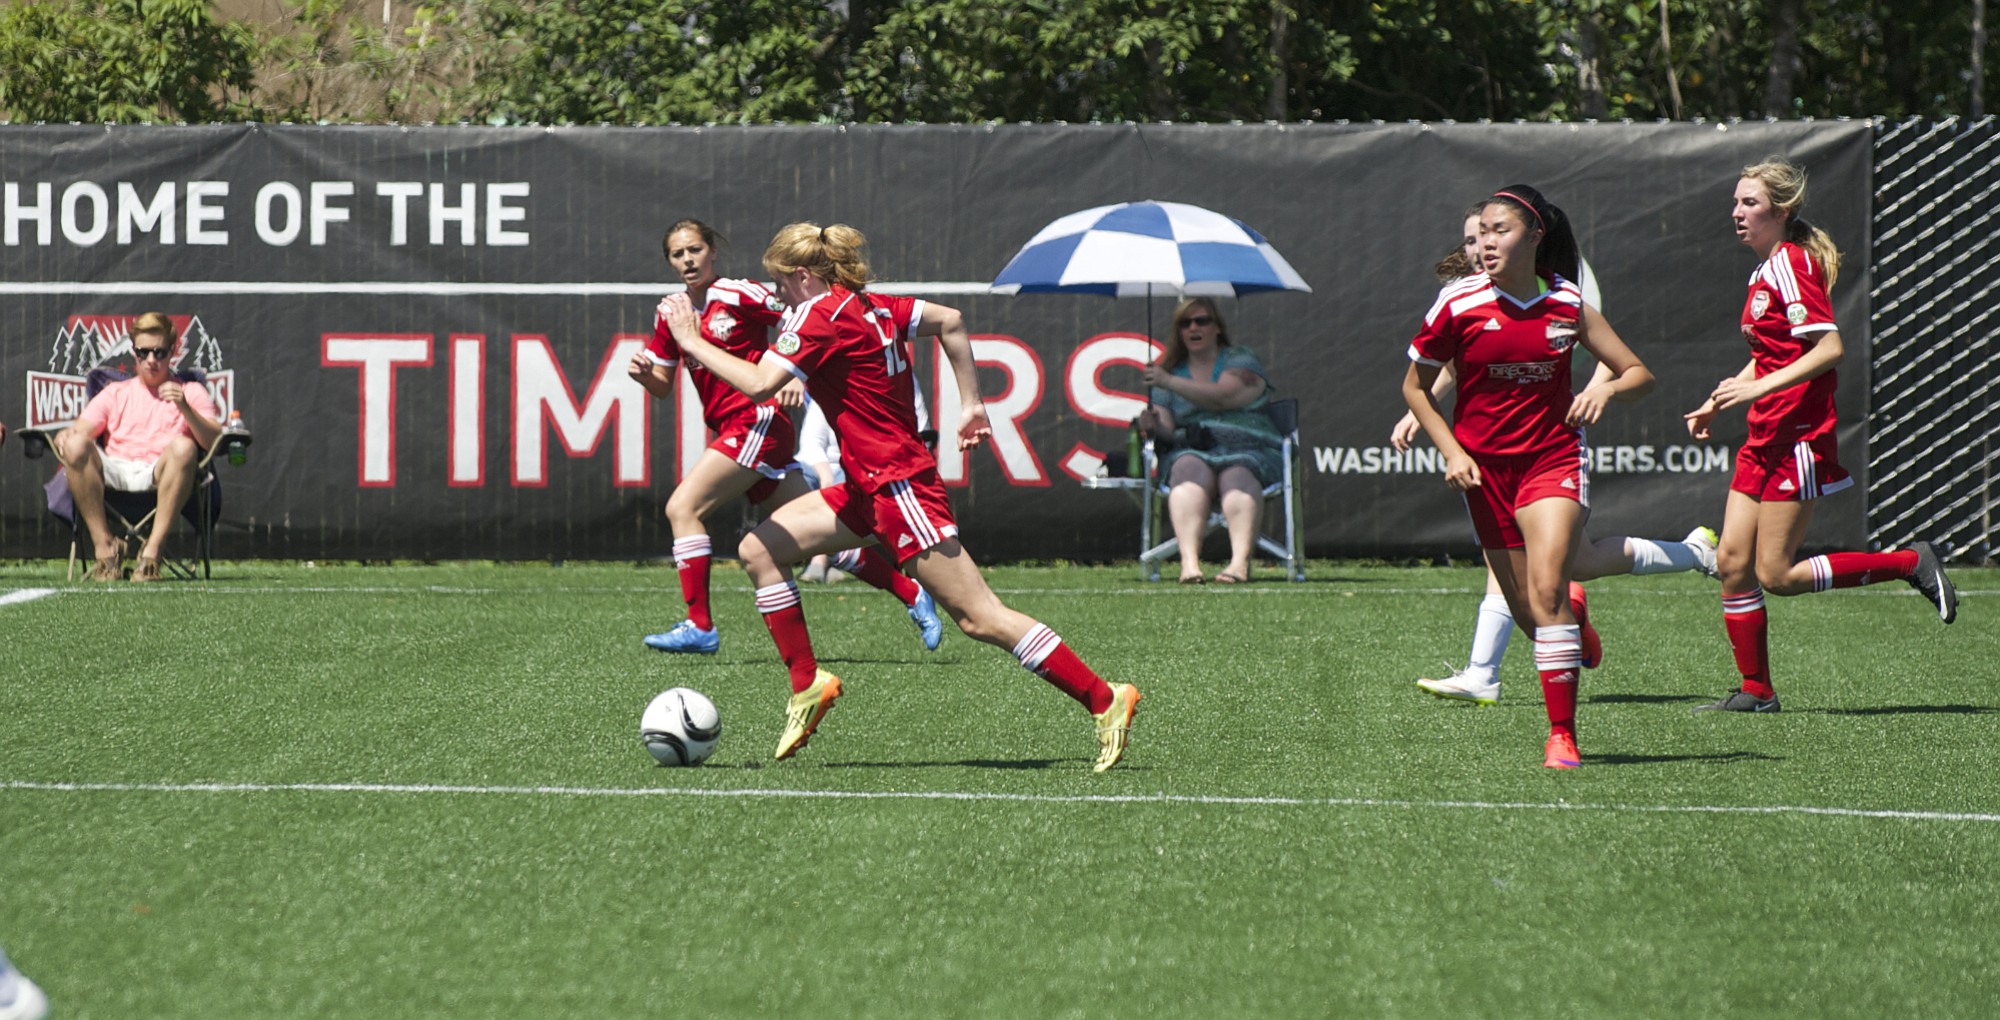 The Washington Timbers G98 Red team plays on a new turf soccer field at the Harmony Sports Complex, Friday, June 26, 2015.